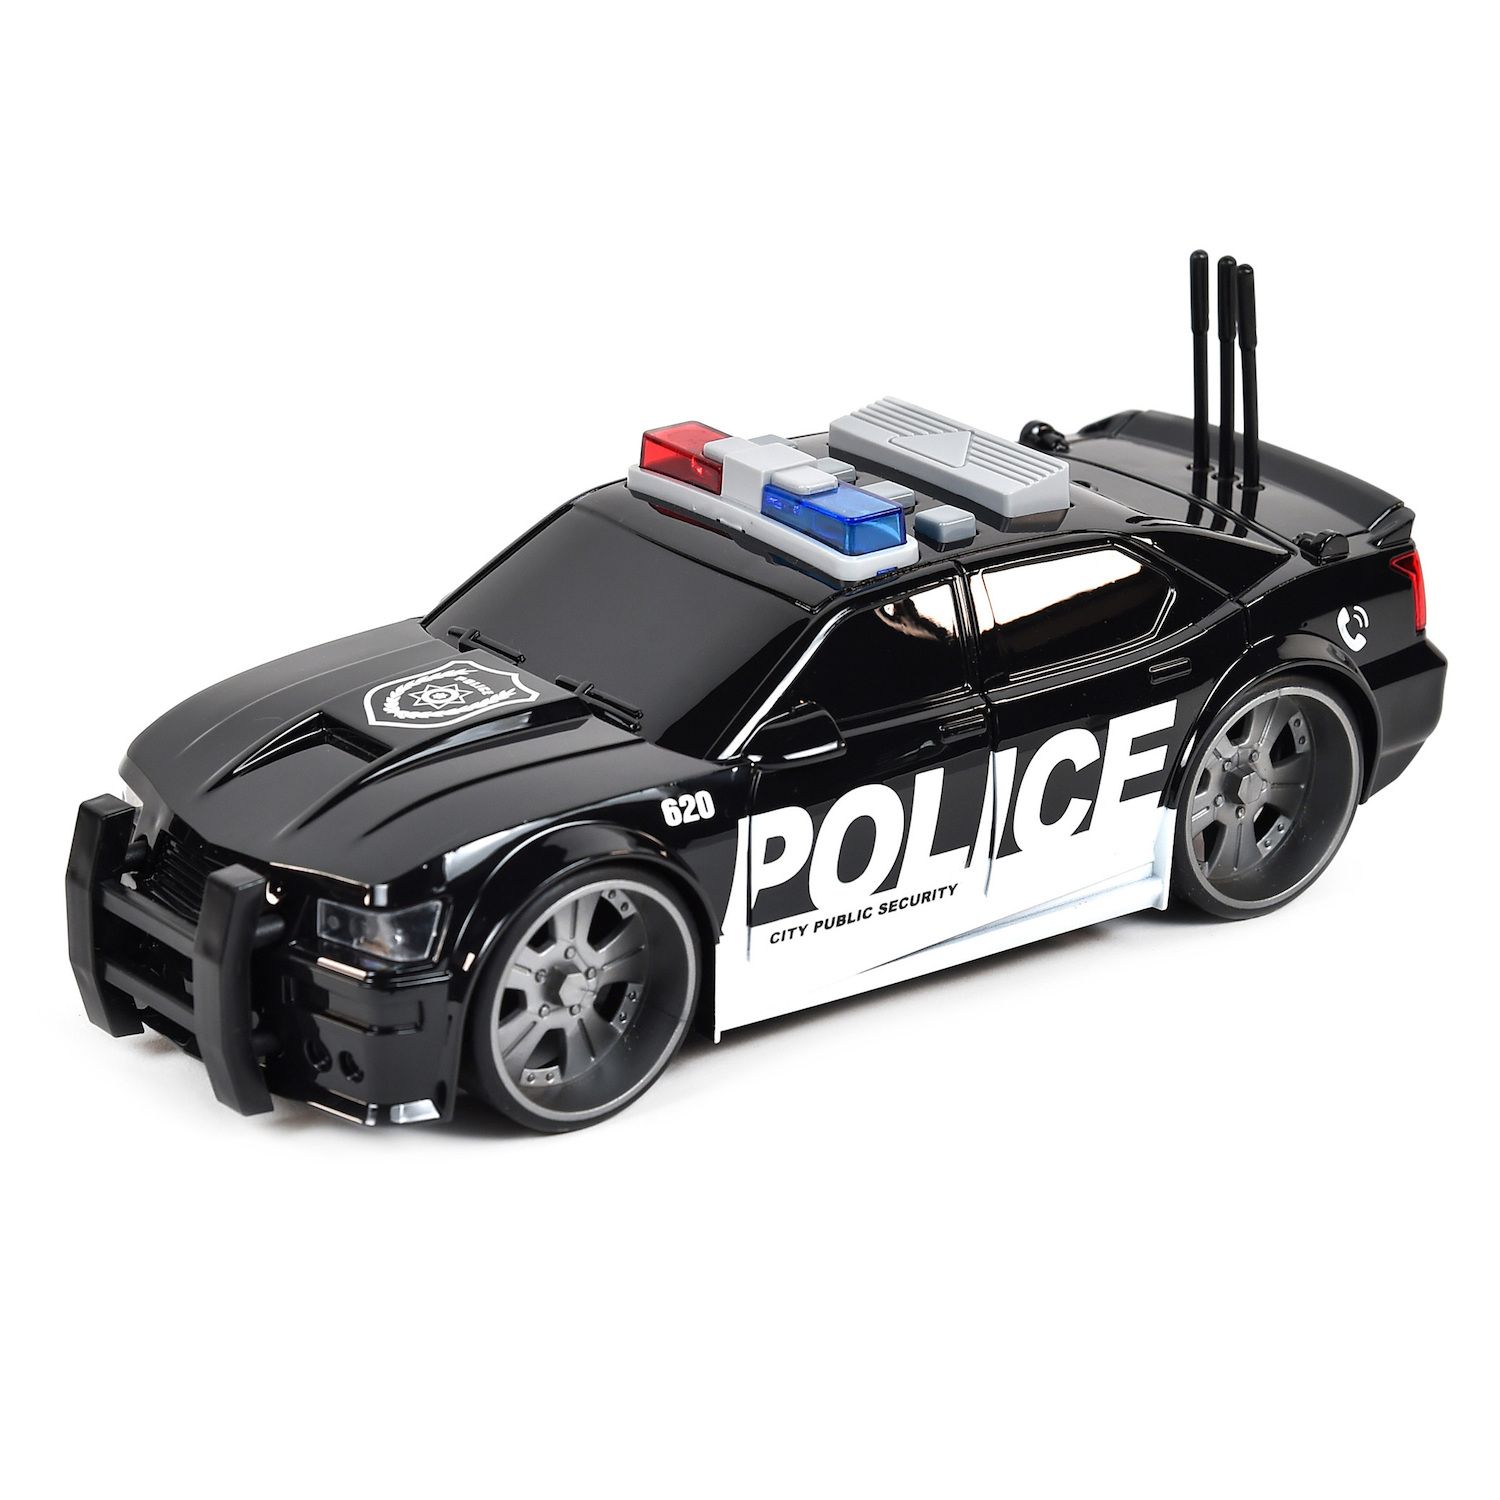 Maxx Action Large Police Suv Lights & Sounds Motorized Rescue